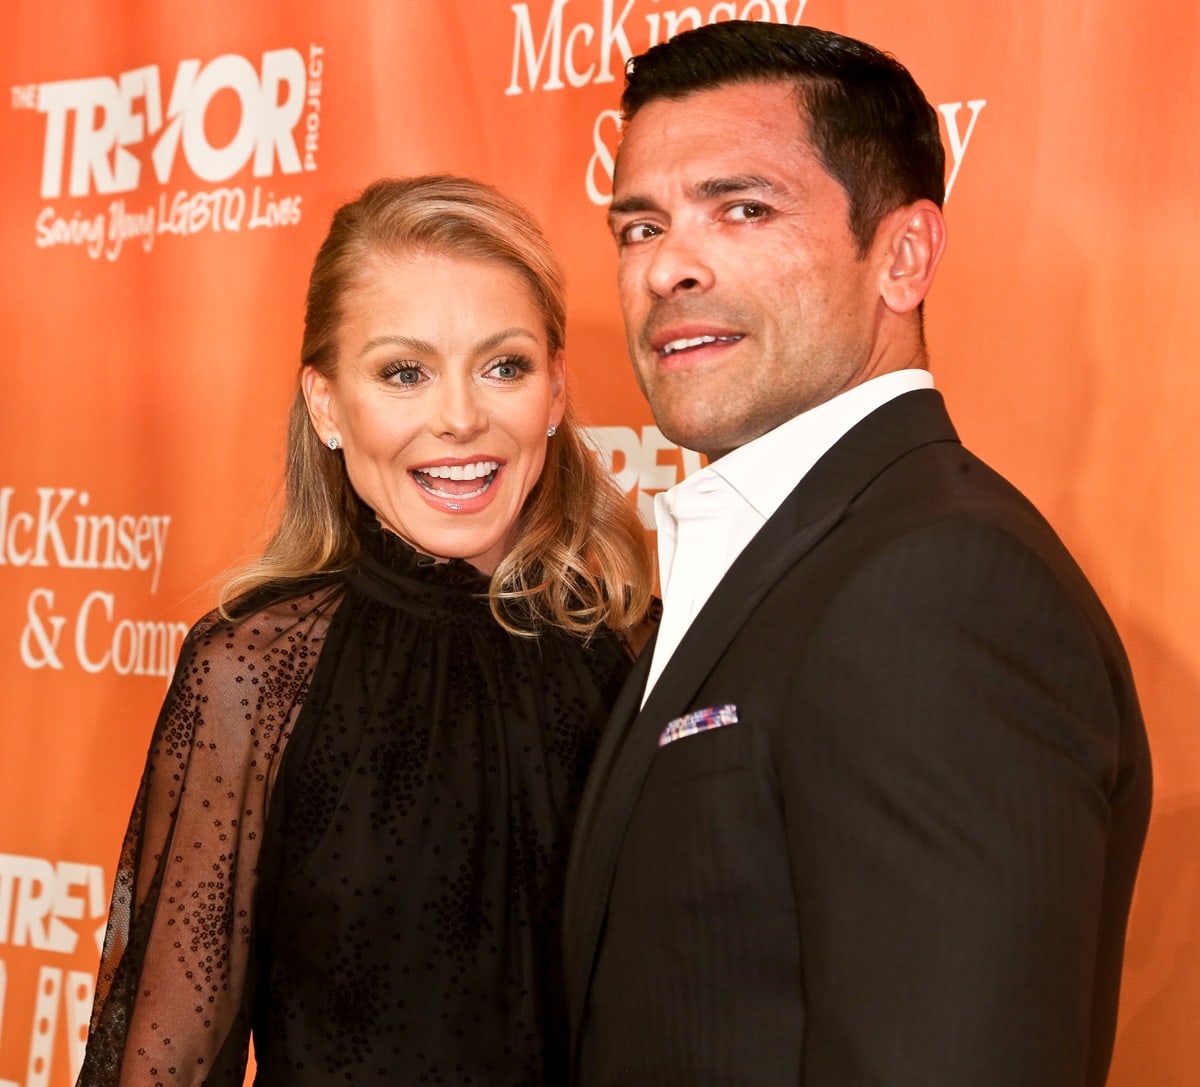 Kelly Ripa assured fans that there will be no inappropriate behavior between her and her husband, Mark Consuelos, when they become co-hosts on Live